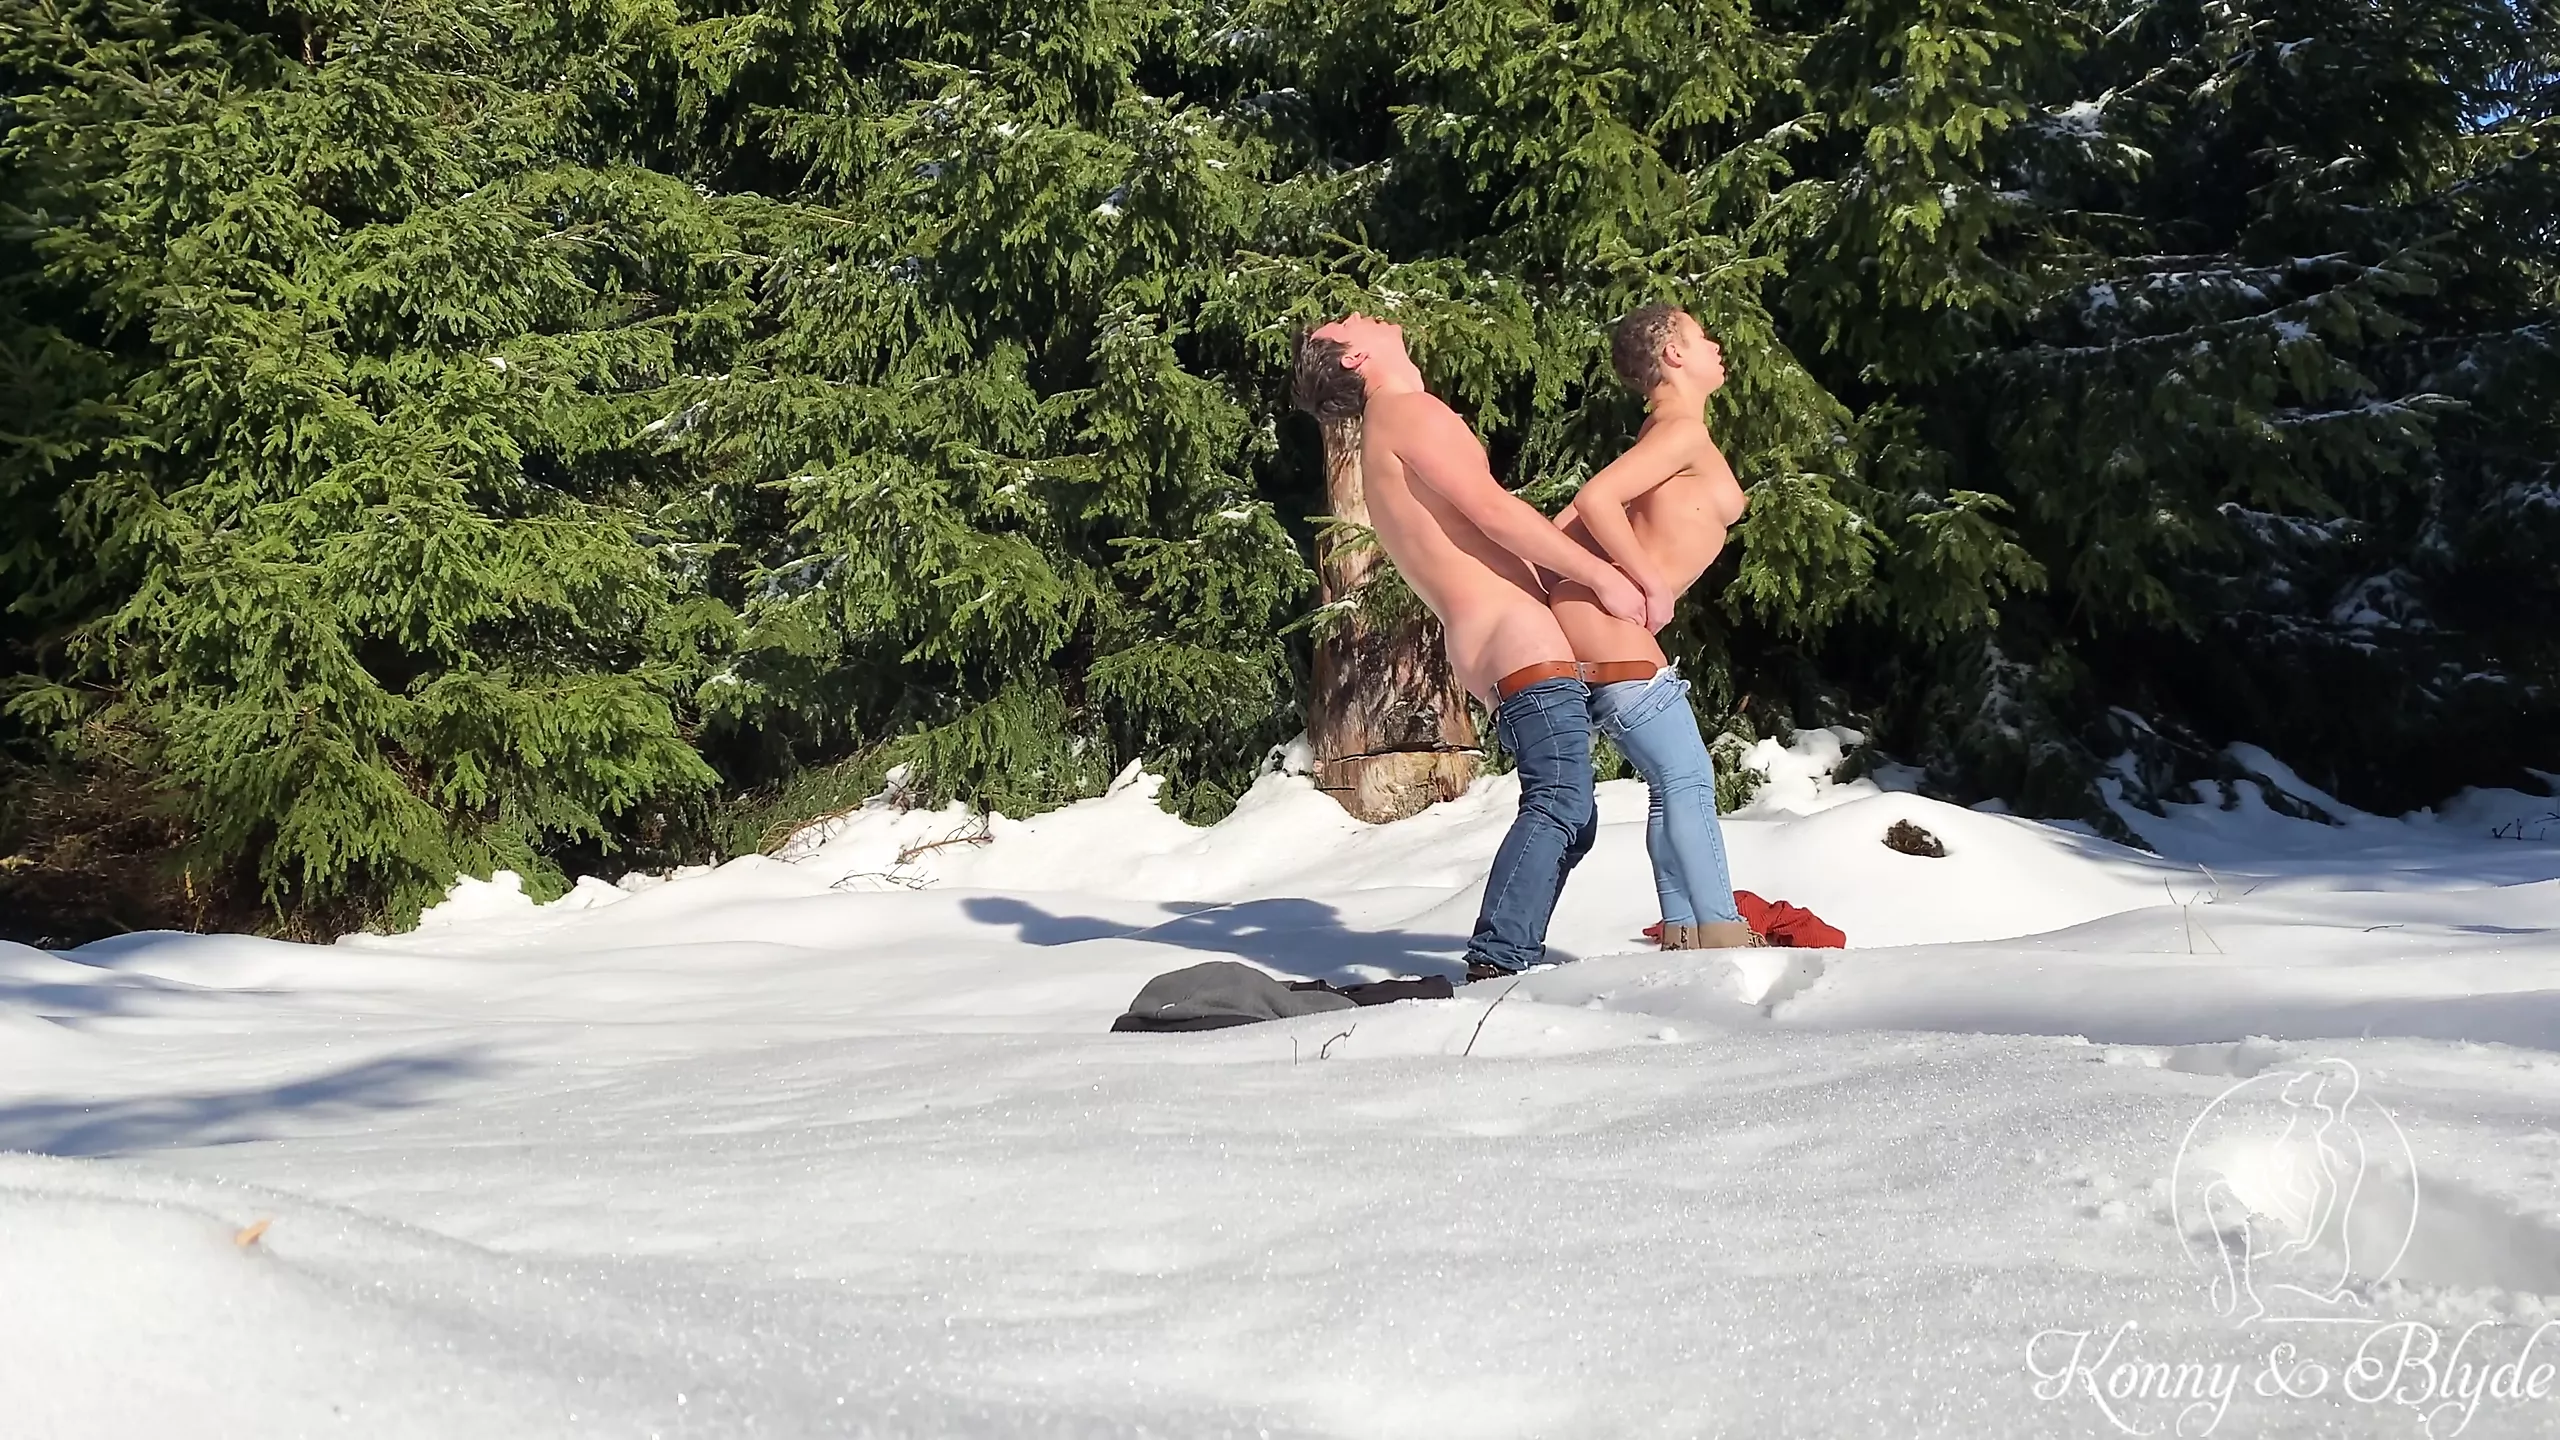 Konny and Blyde having sex in a snowy winter forest in public Nude Pic Hq